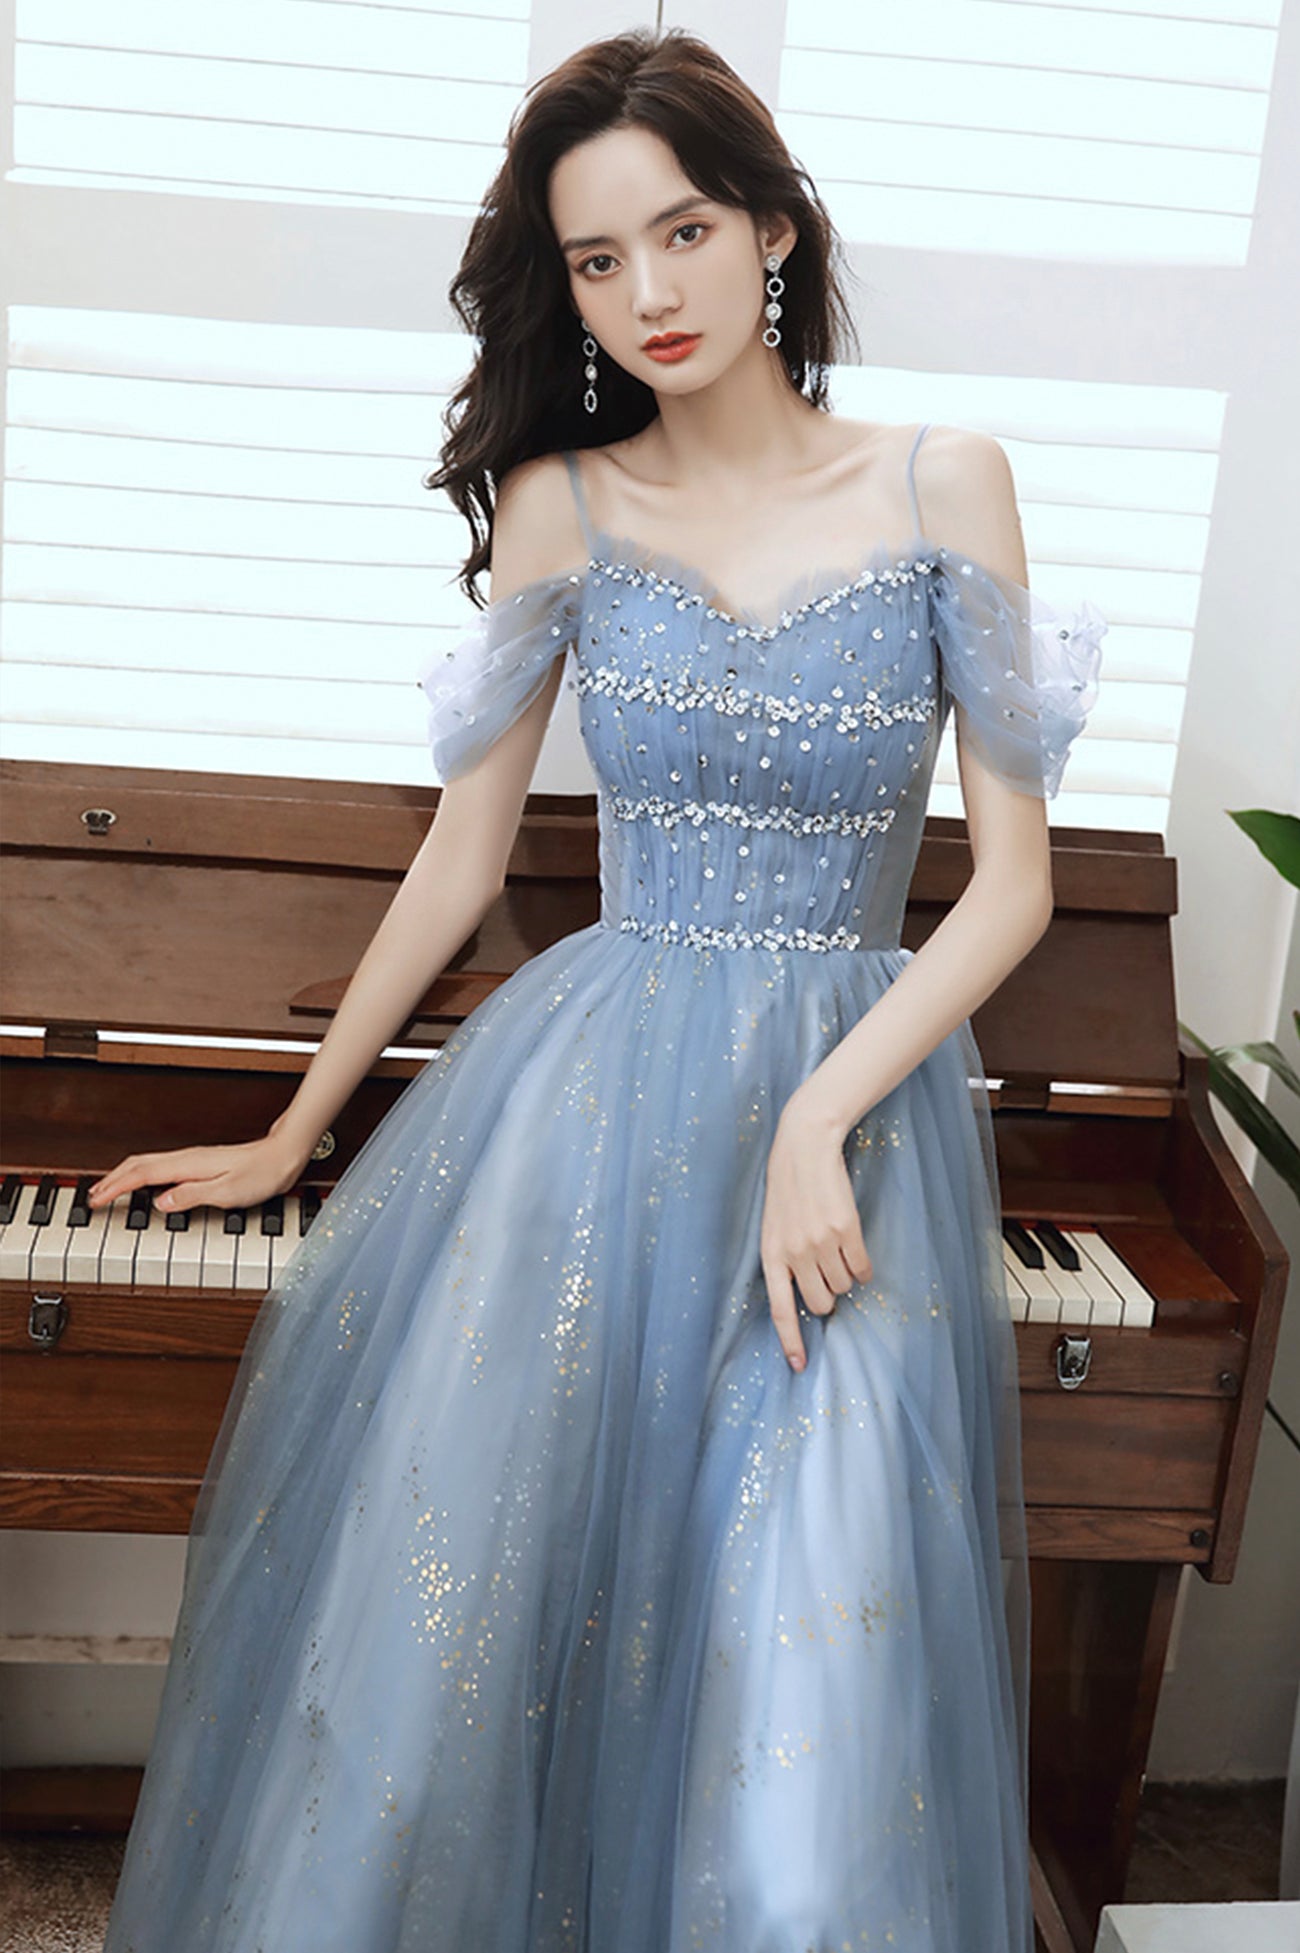 Blue tulle beads long A line prom dress evening dress  8713